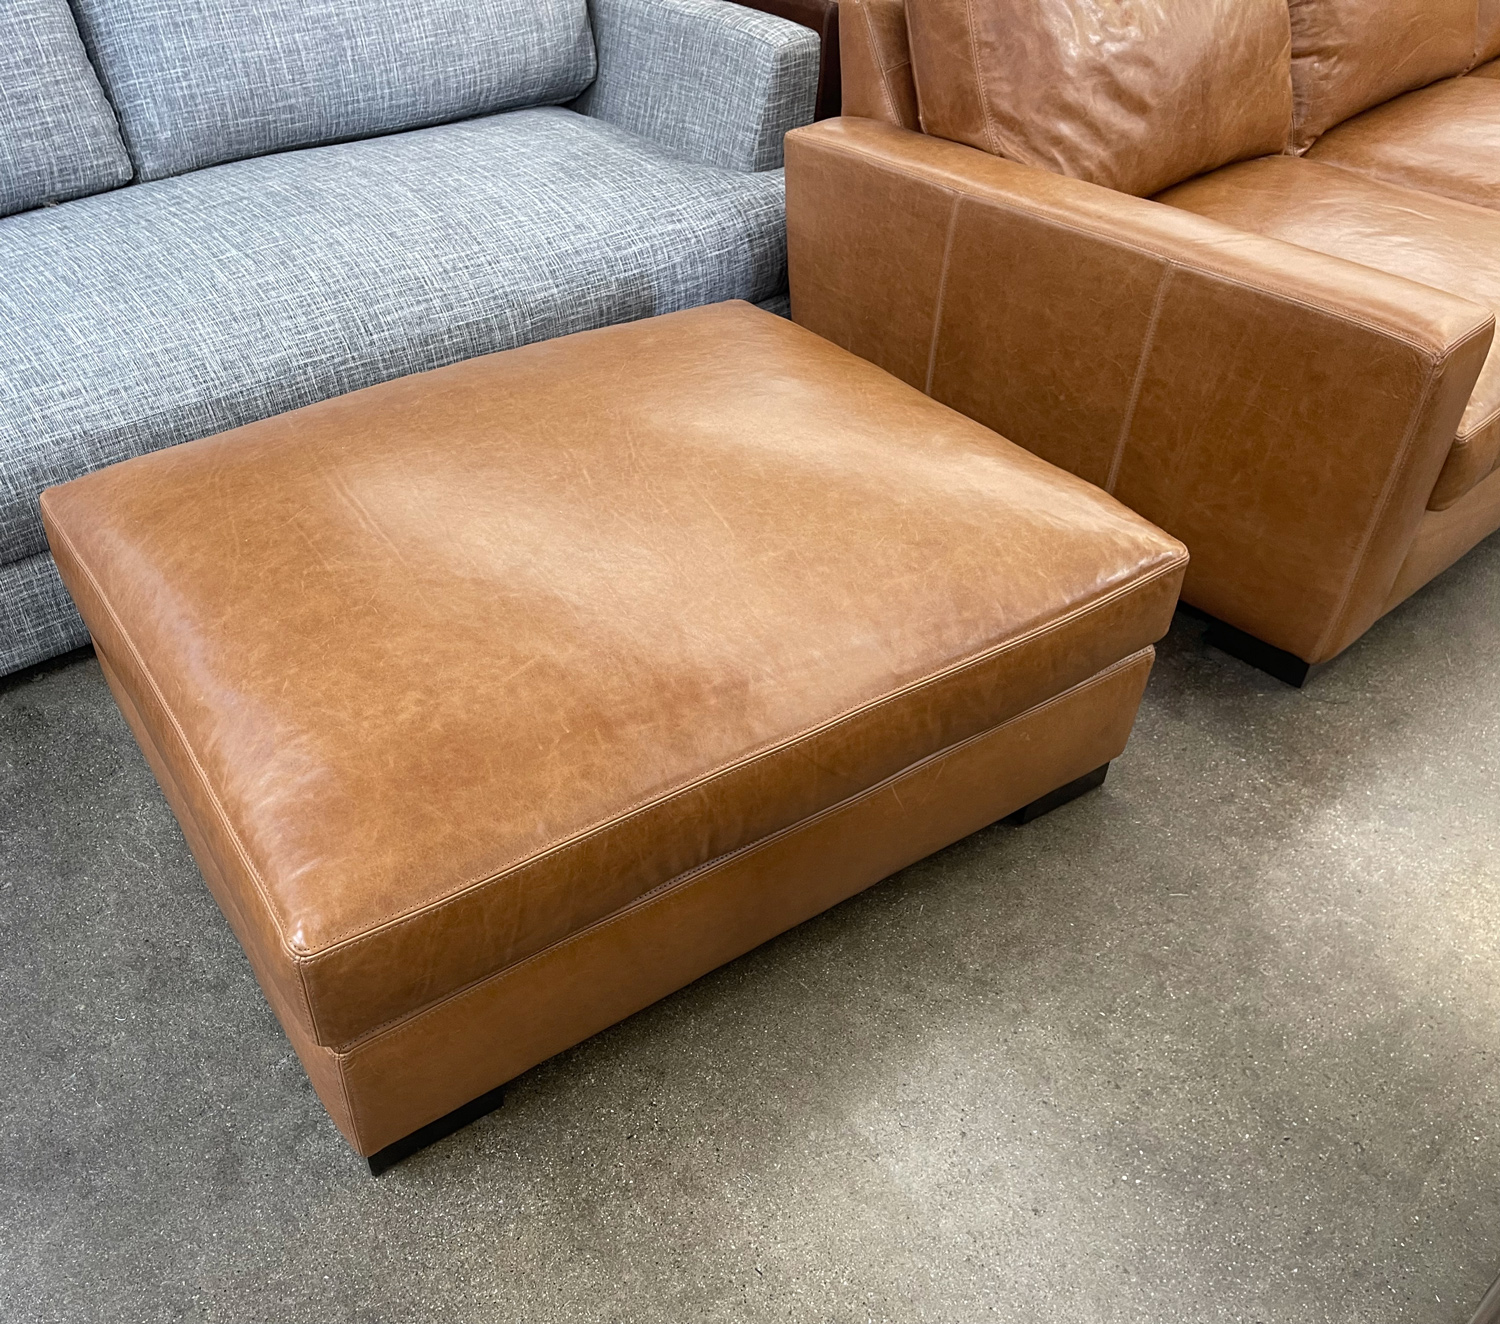 Braxton 44" x 36" Cocktail Ottoman in Mont Blanc Sycamore Leather